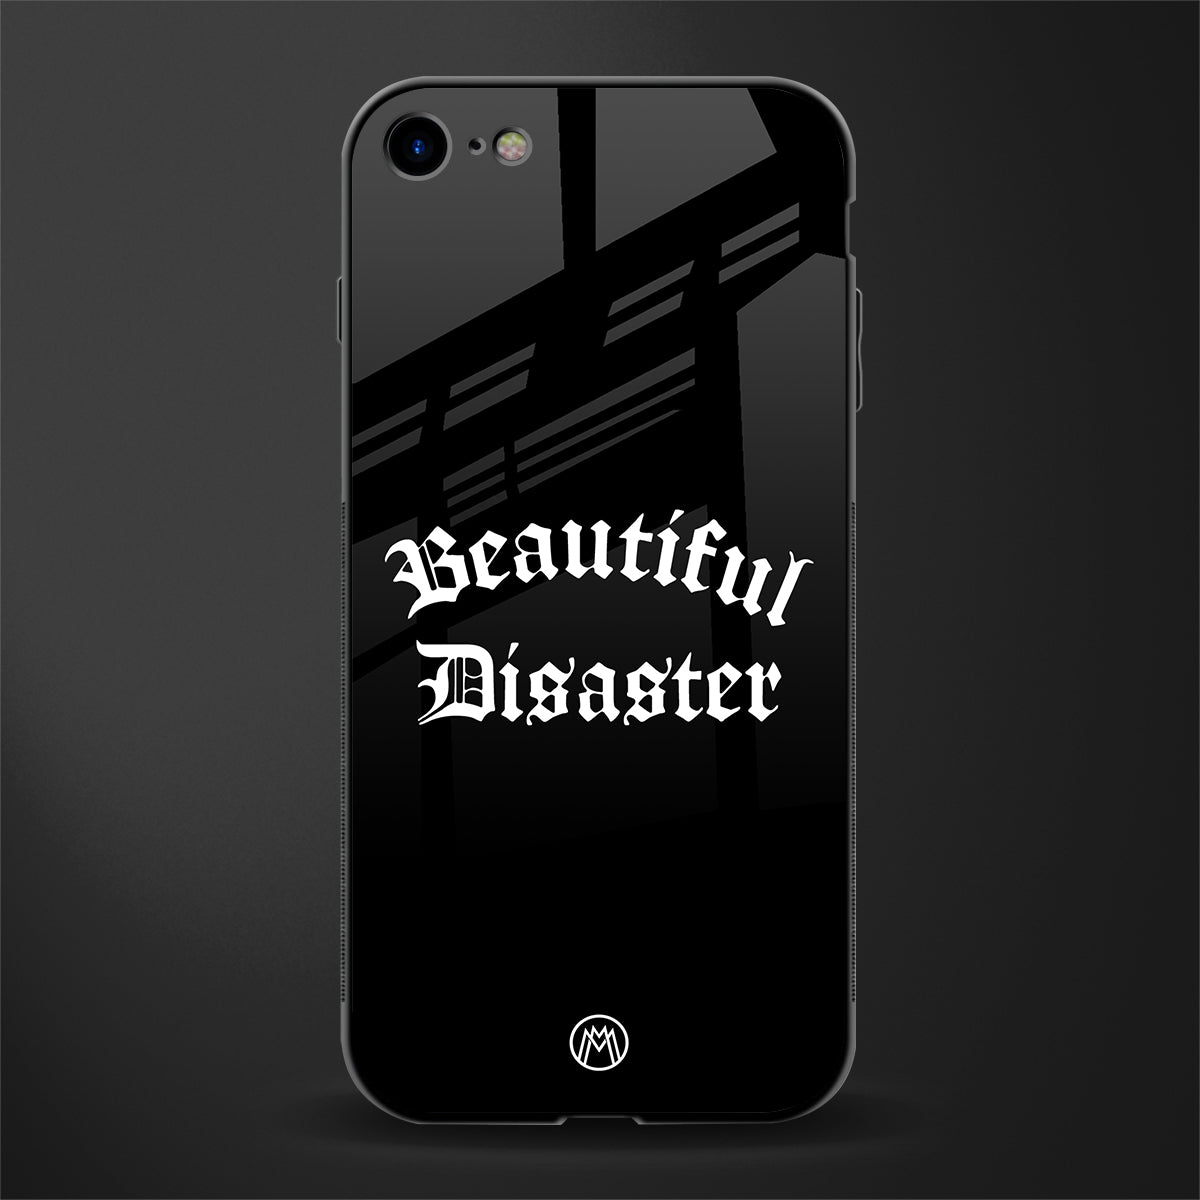 beautiful disaster glass case for iphone 7 image